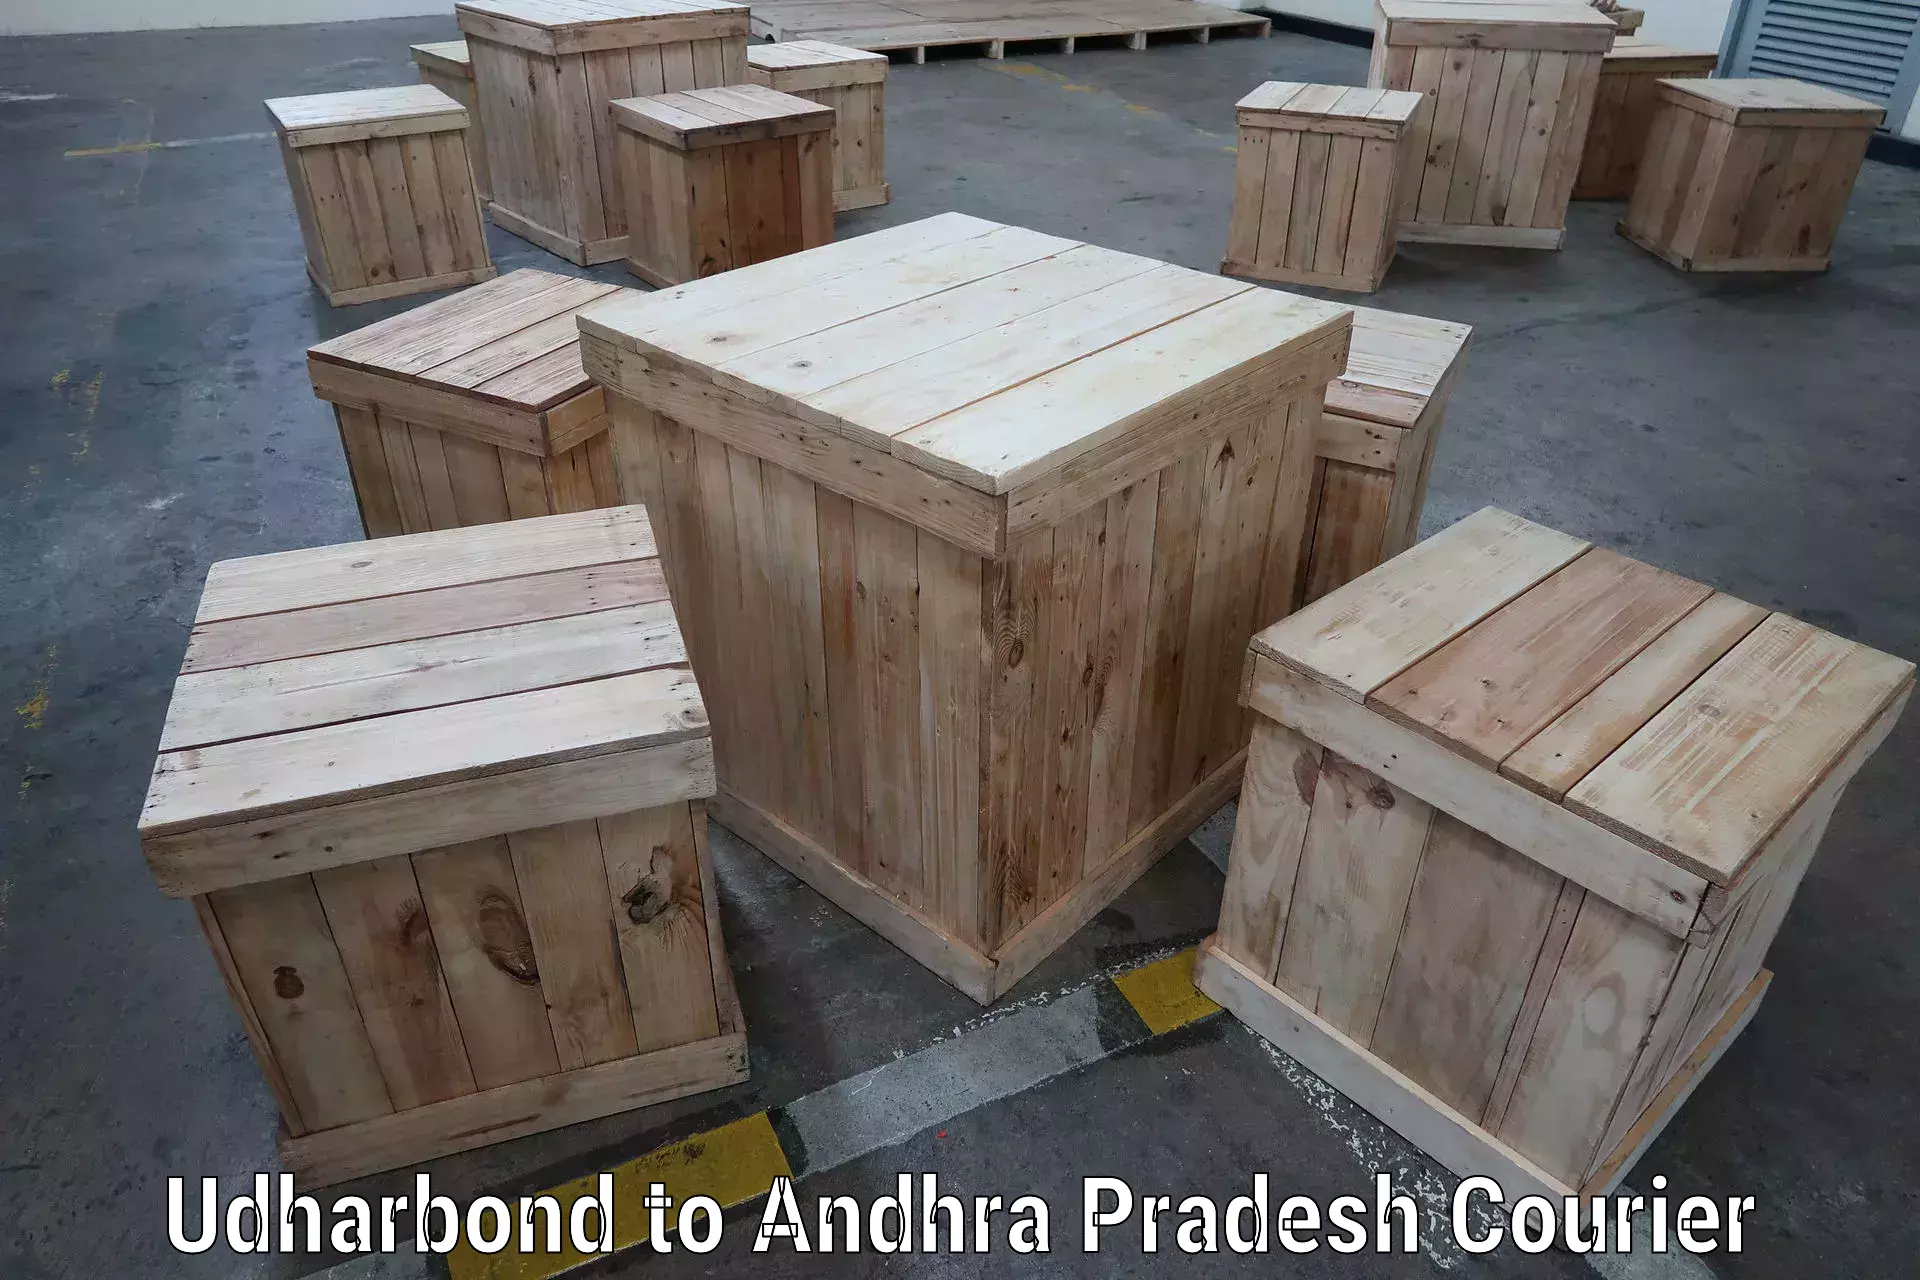 Supply chain delivery Udharbond to Palakonda